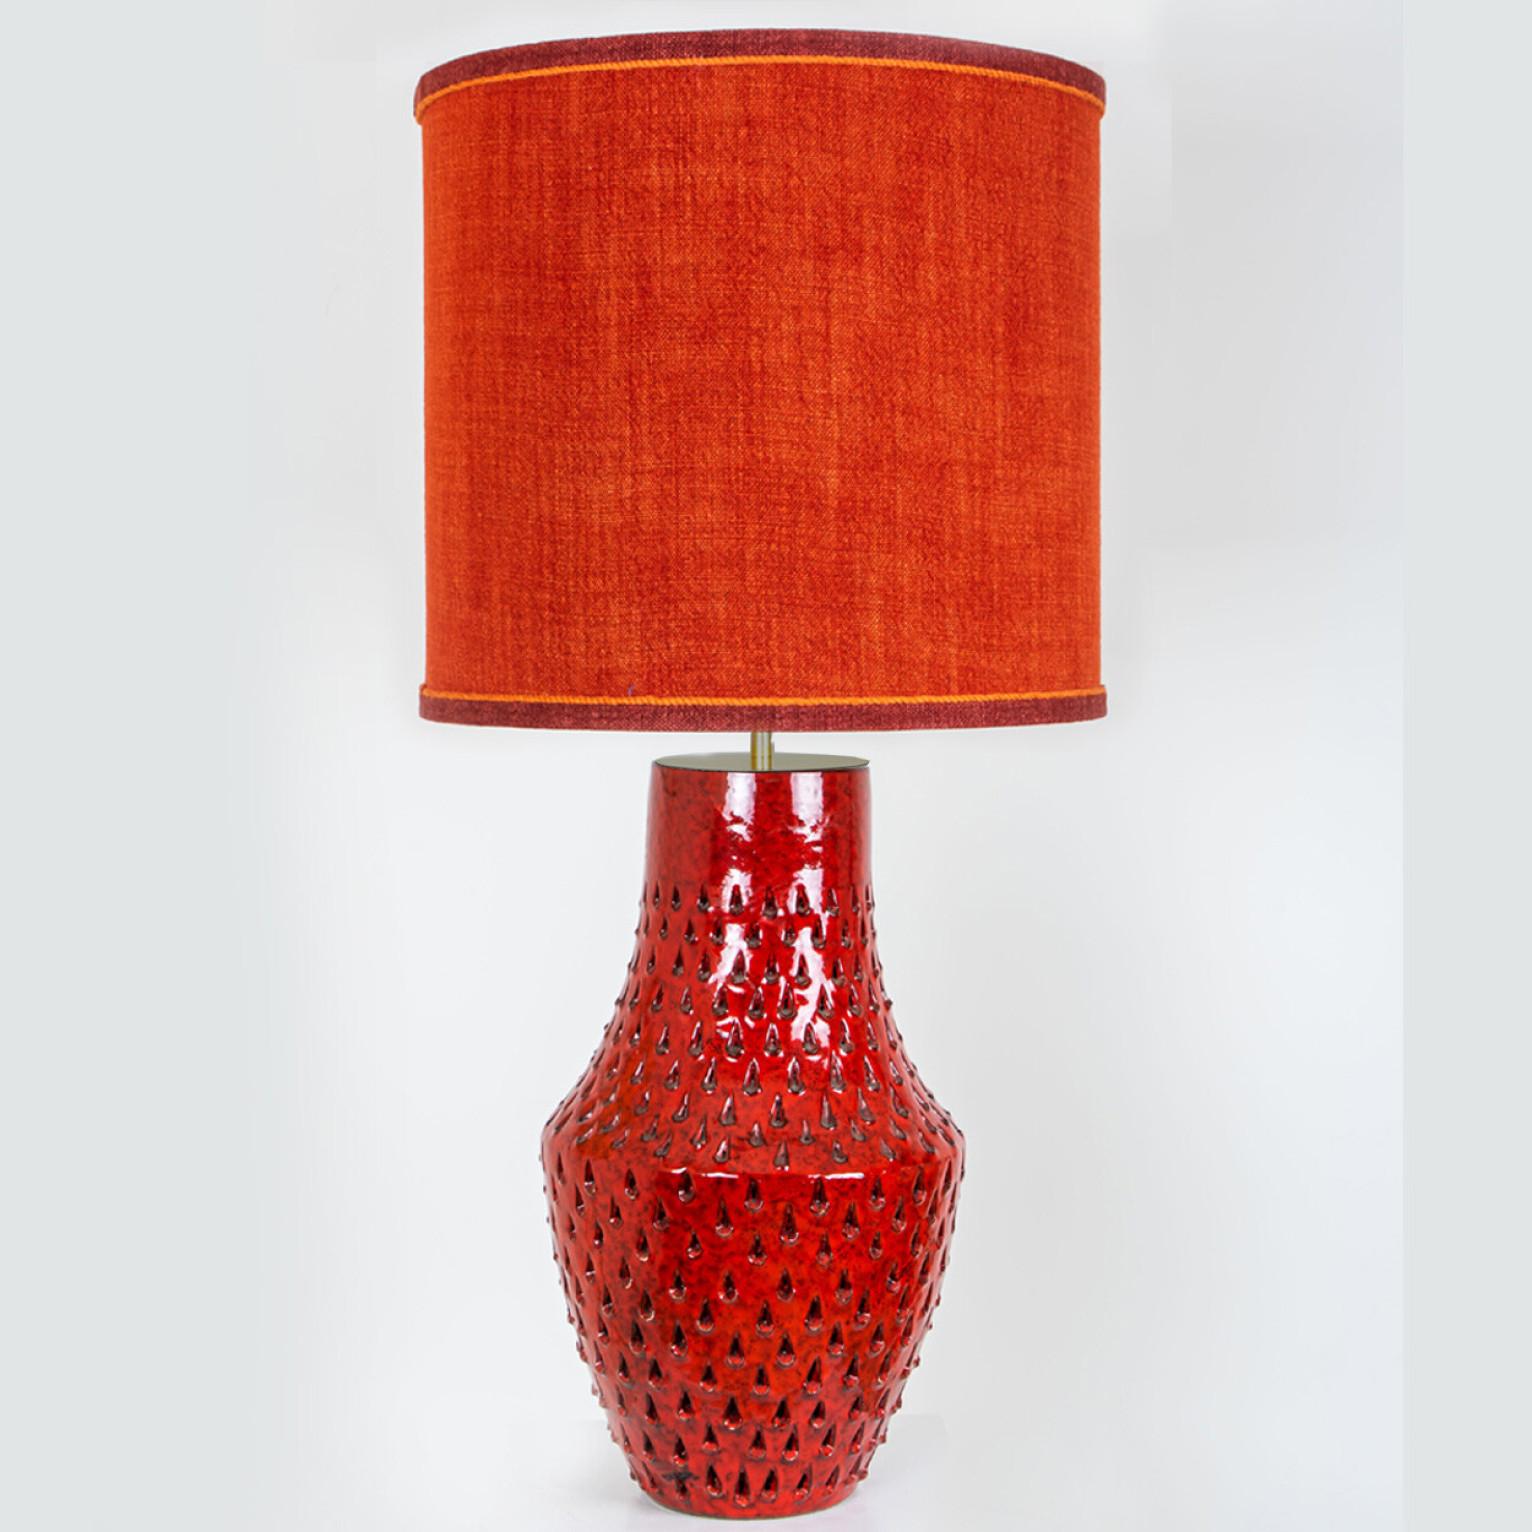 Unique ceramic floorlamp by Fratelli Fanciullacci for by Bittosi, A sculptural high-end piece made of handmade ceramic in red tones. With an exceptional new custom made red silk lampshade by René Houben. With warm bronze/gold inner-shade.

The lamp